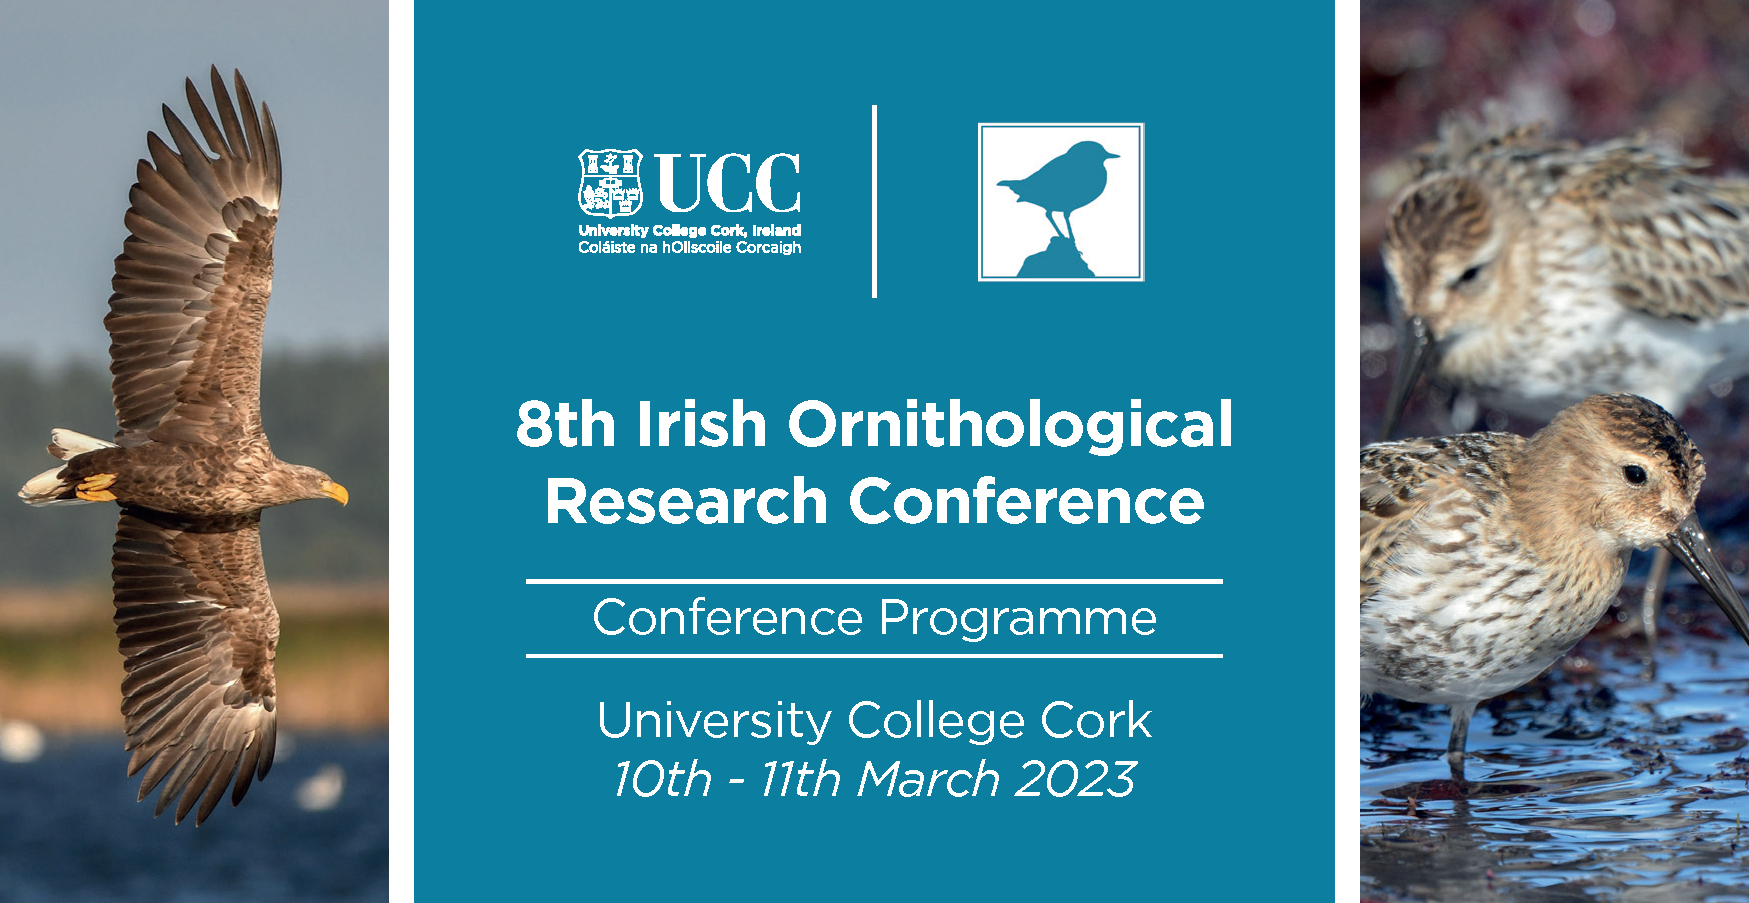 Ornithology Conference at UCC explores the ecology and conservation of birds